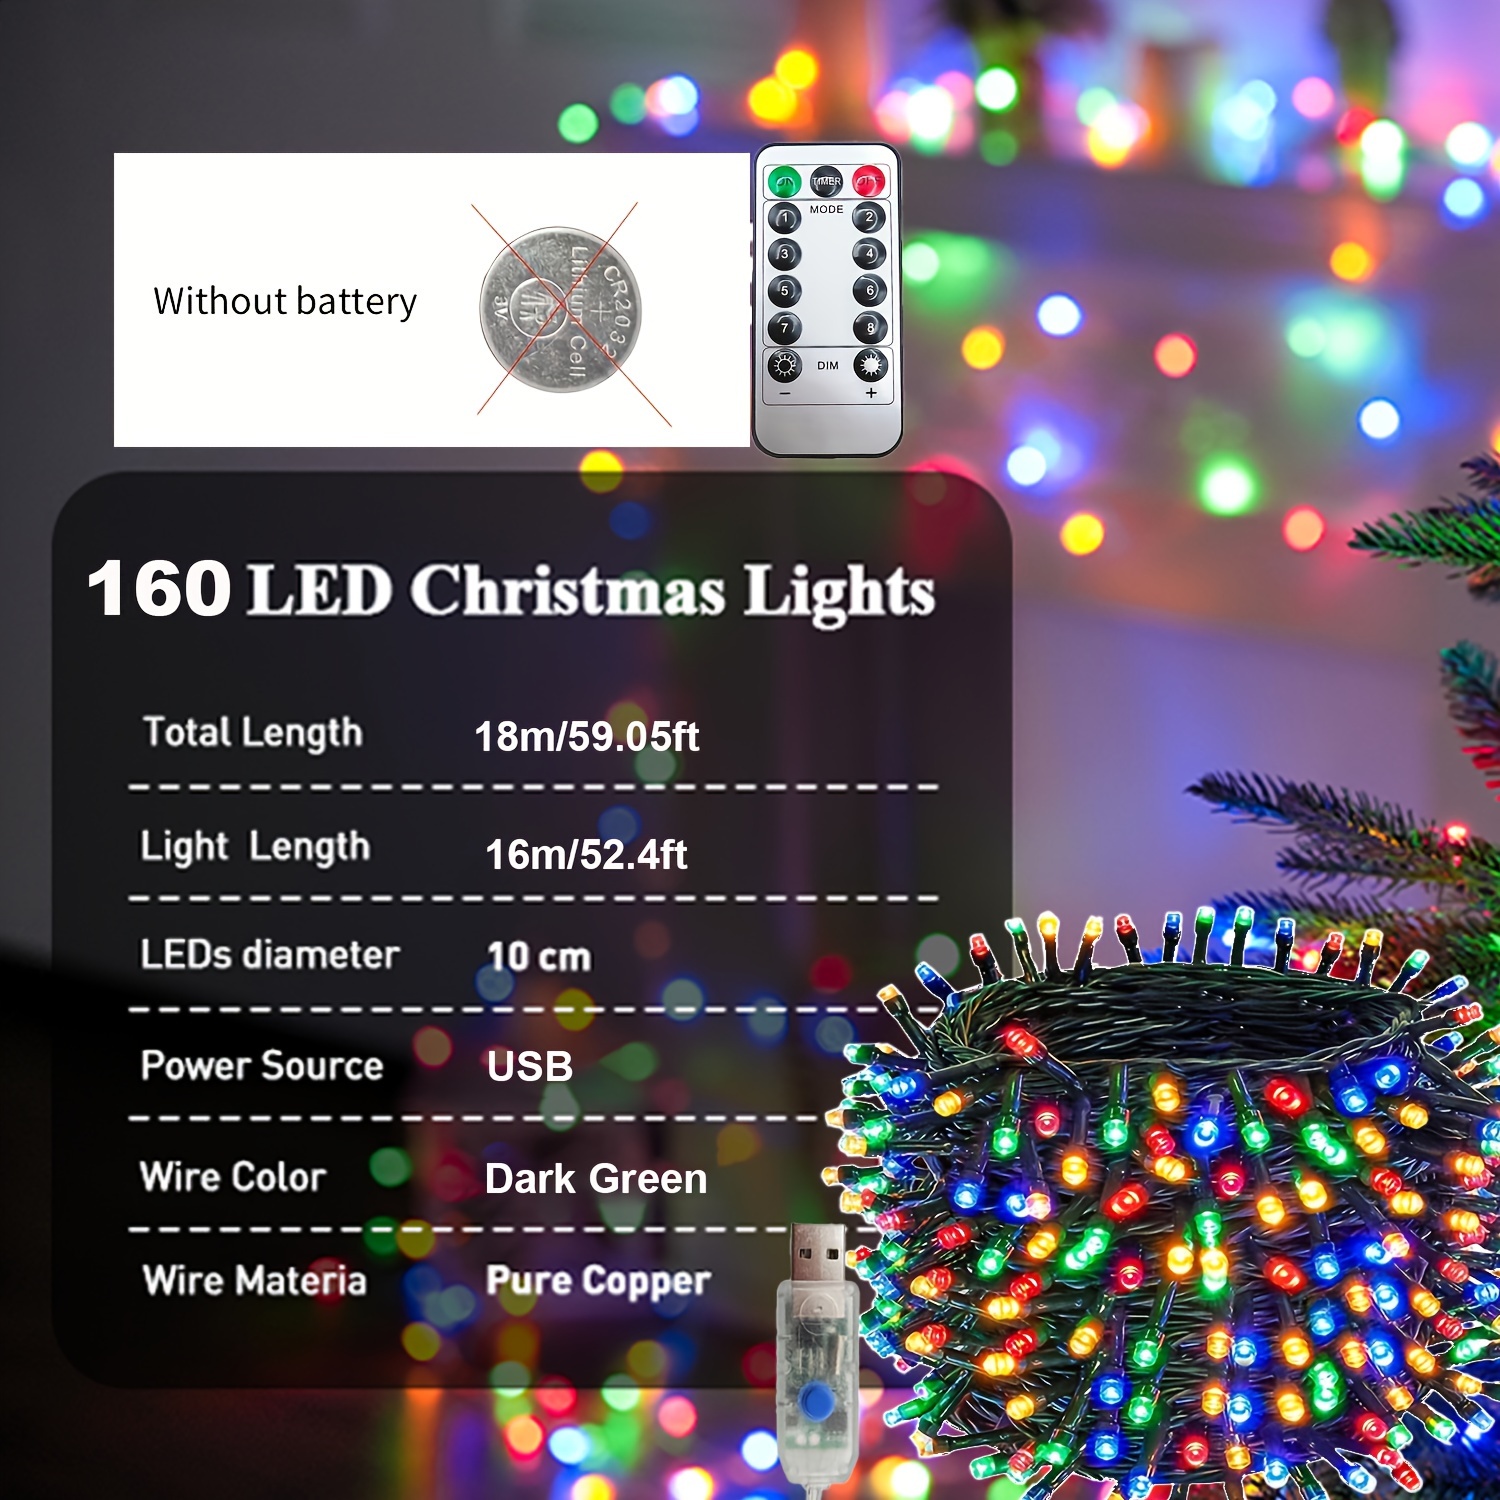 16.5' Battery Operated LED Fairy Lights with RBG Remote Control